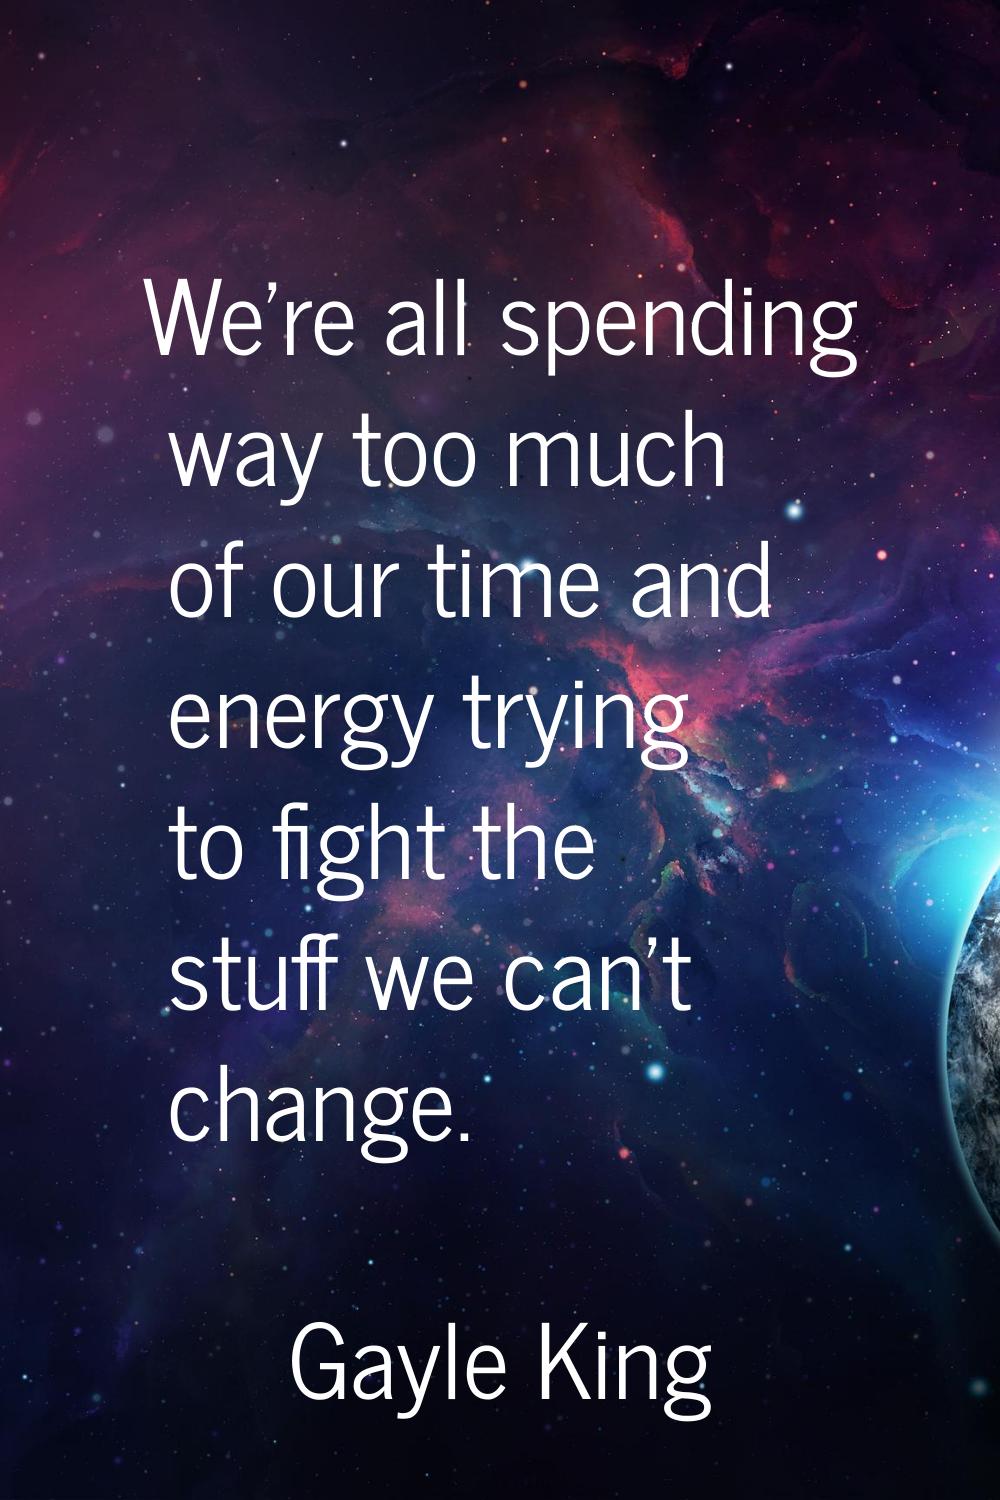 We're all spending way too much of our time and energy trying to fight the stuff we can't change.